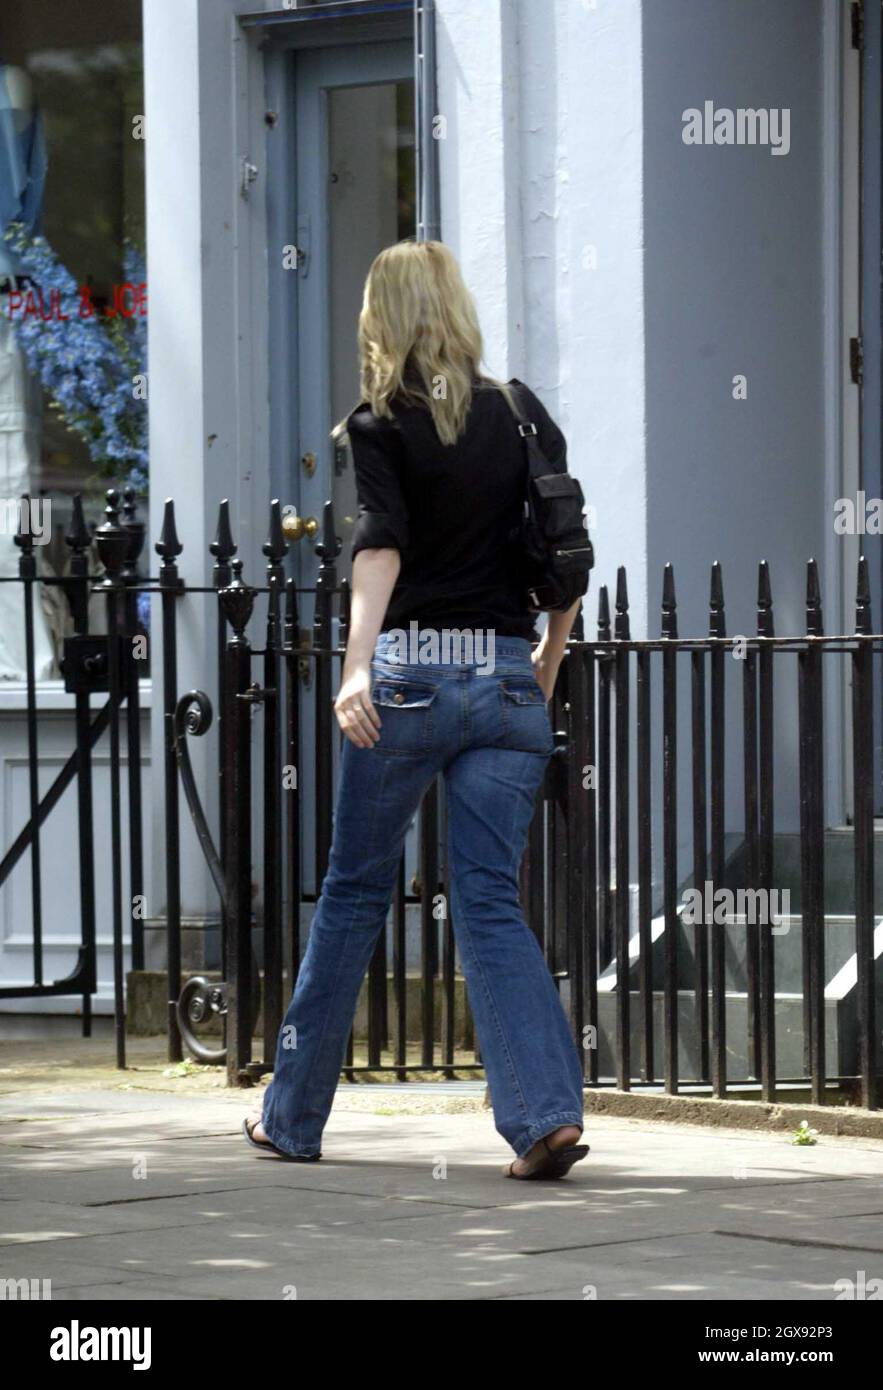 Claudia Schiffer, supermodel, with her 'does my bum look big in this' jeans  as she shops at the half price sales in west London Stock Photo - Alamy